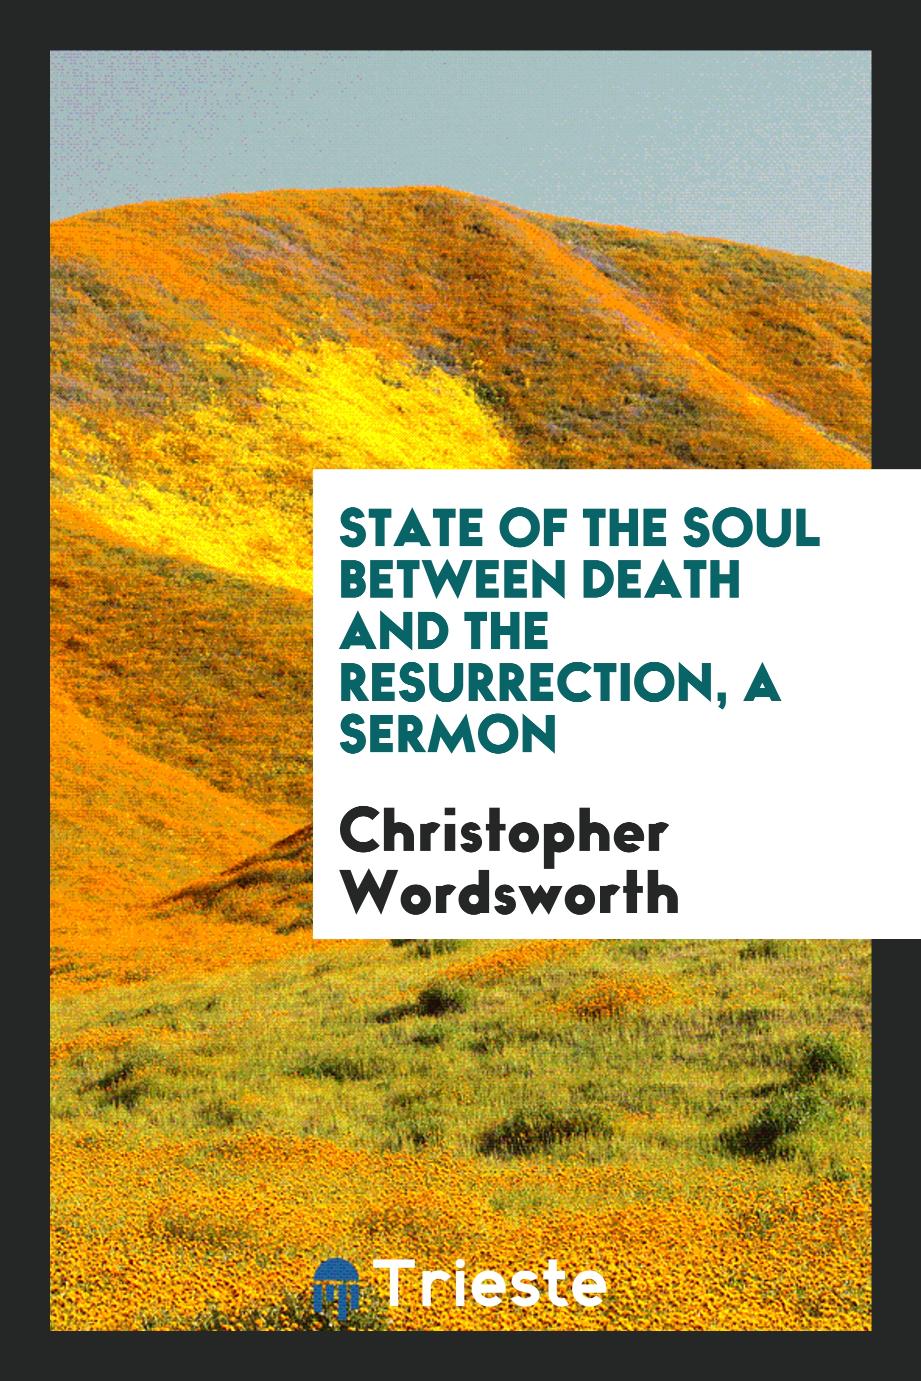 State of the soul between death and the Resurrection, a sermon